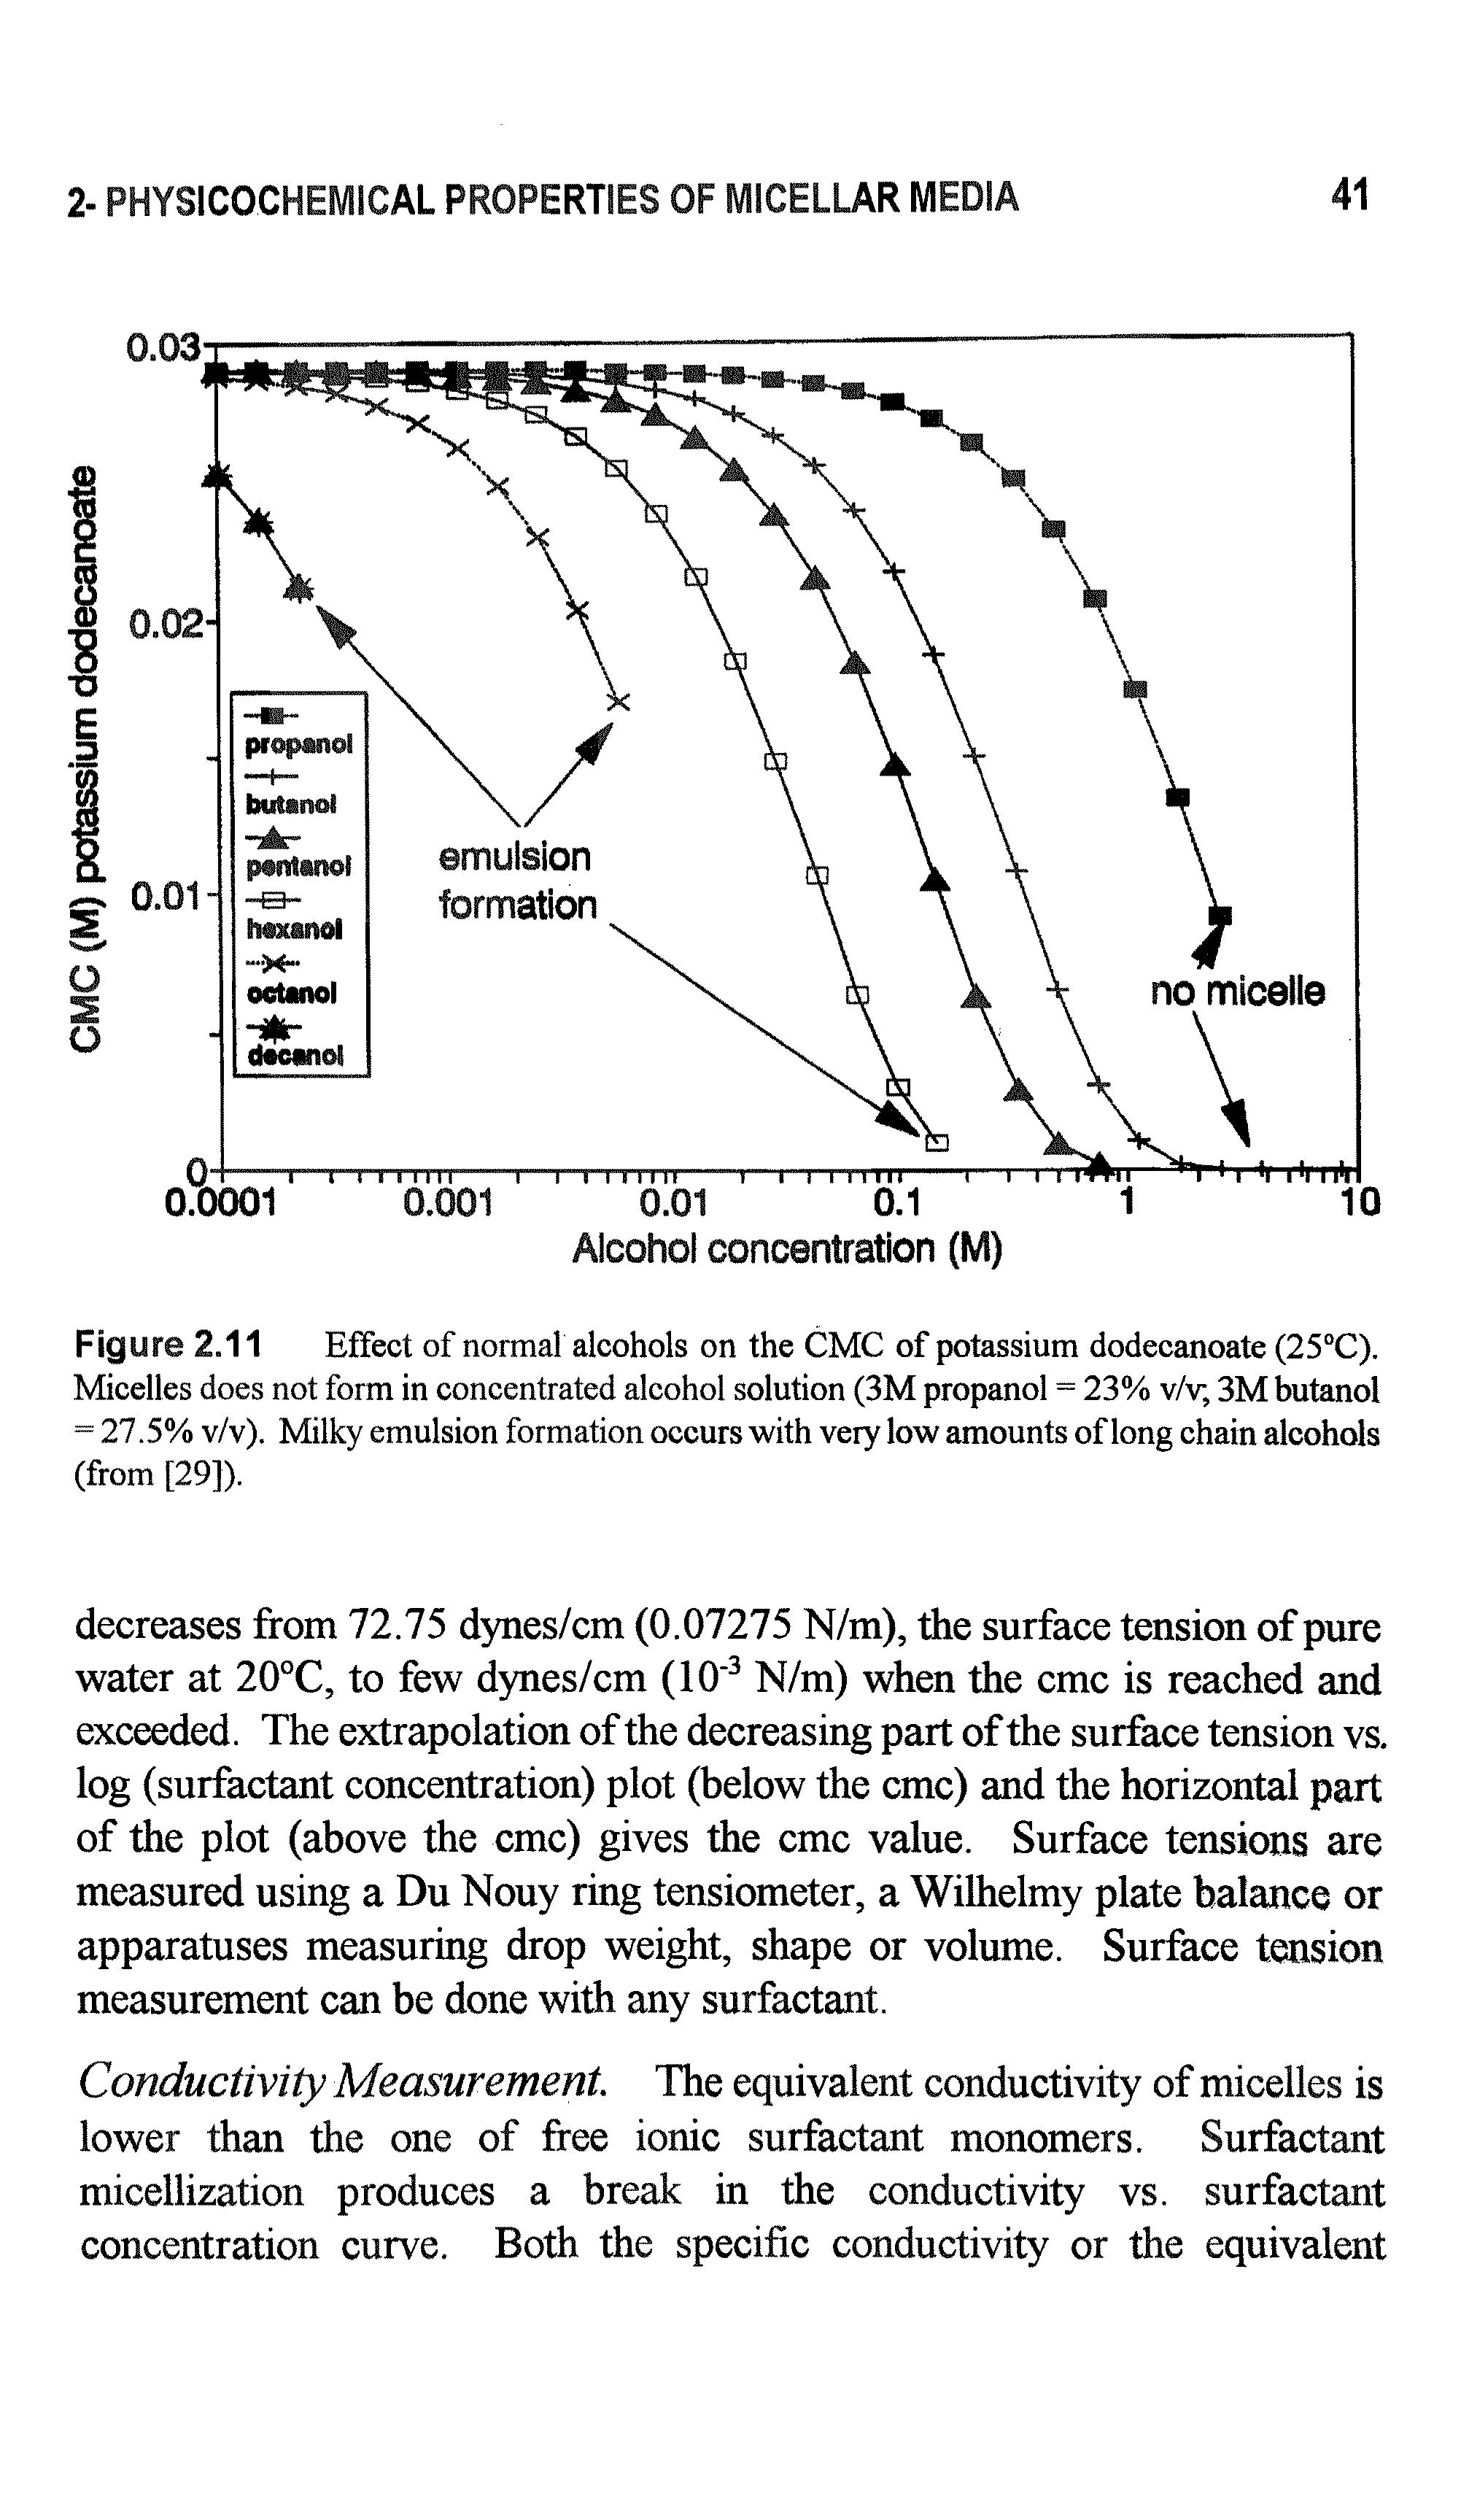 Figure 2.11 Effect of normal alcohols on the CMC of potassium dodecanoate (25 C). Micelles does not form in concentrated alcohol solution (3M propanol = 23% v/v, 3M butanol = 27.5% v/v). Milky emulsion formation occurs with very low amounts of lone chain alcohols (from [29]).